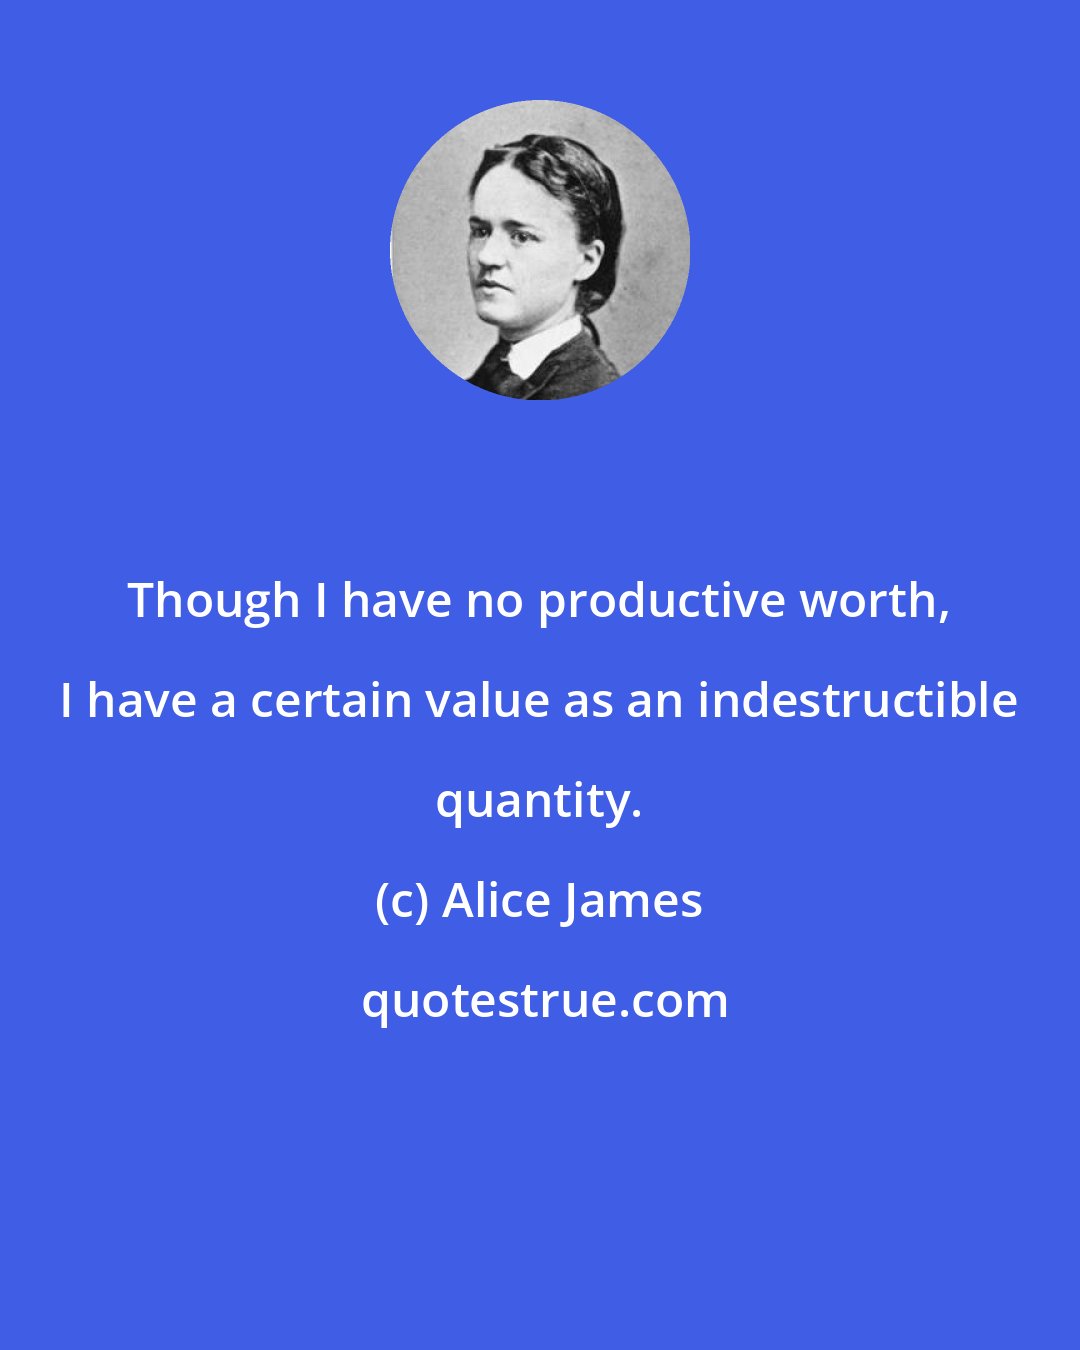 Alice James: Though I have no productive worth, I have a certain value as an indestructible quantity.